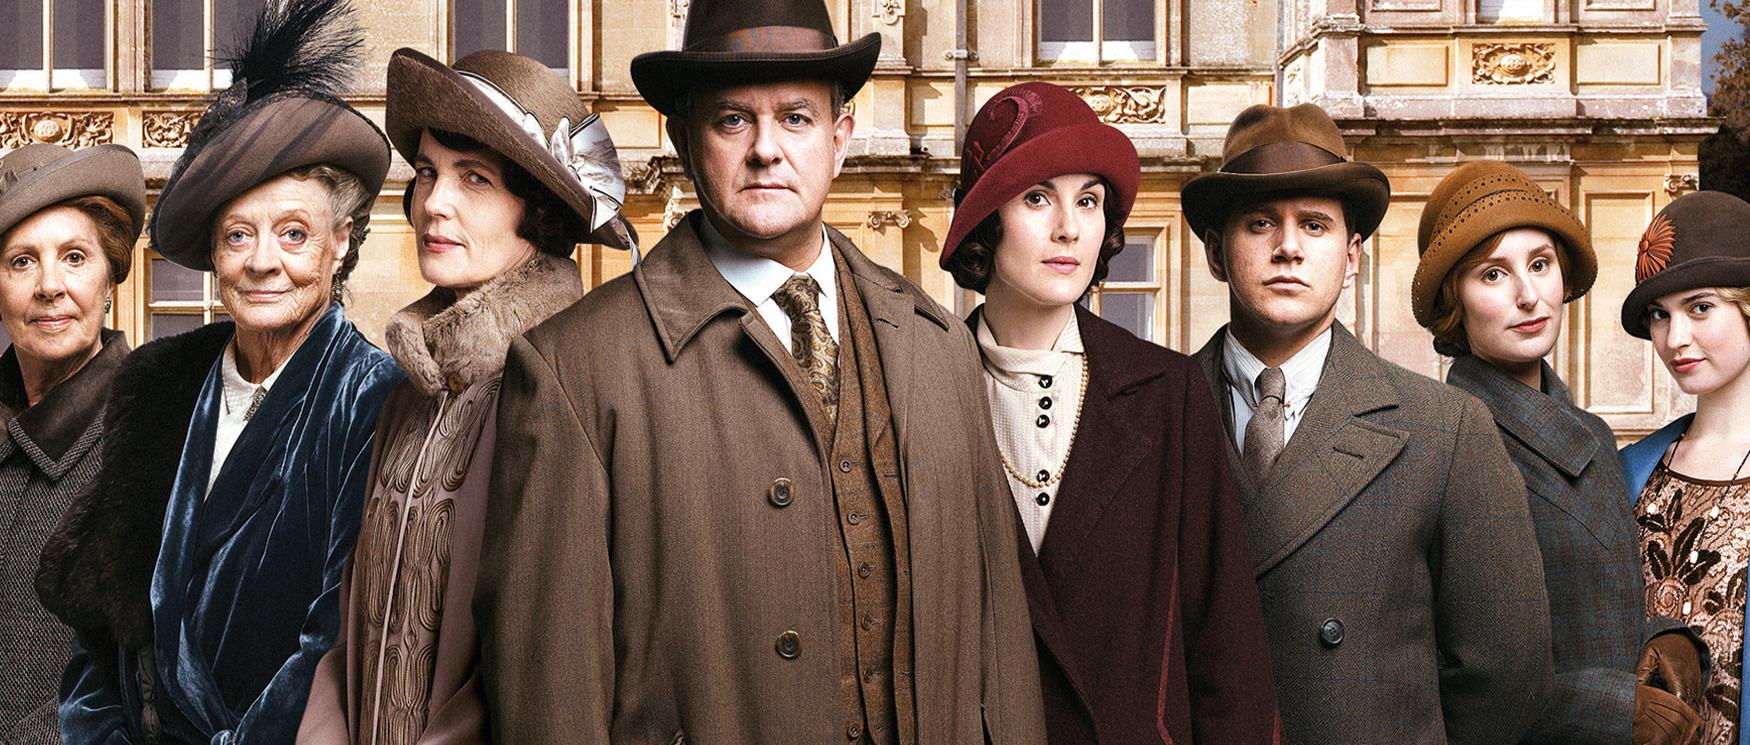 Visit the Real Downton Abbey in Hampshire - Visit Hampshire